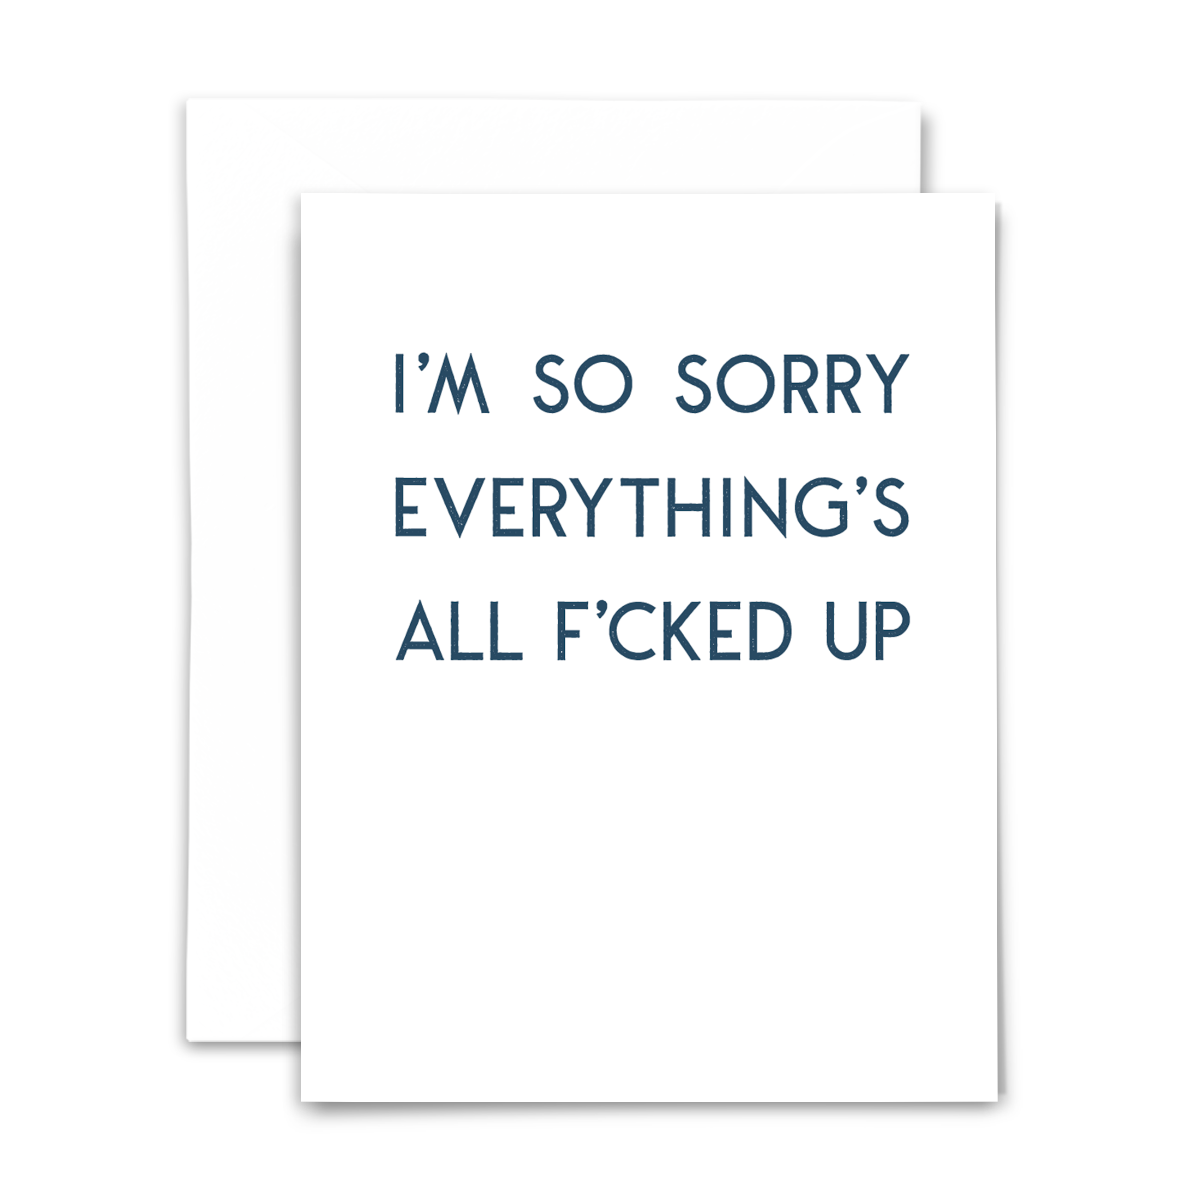 'I'm so sorry everything's all f*cked up' greeting card with blank interior; blue font on white card